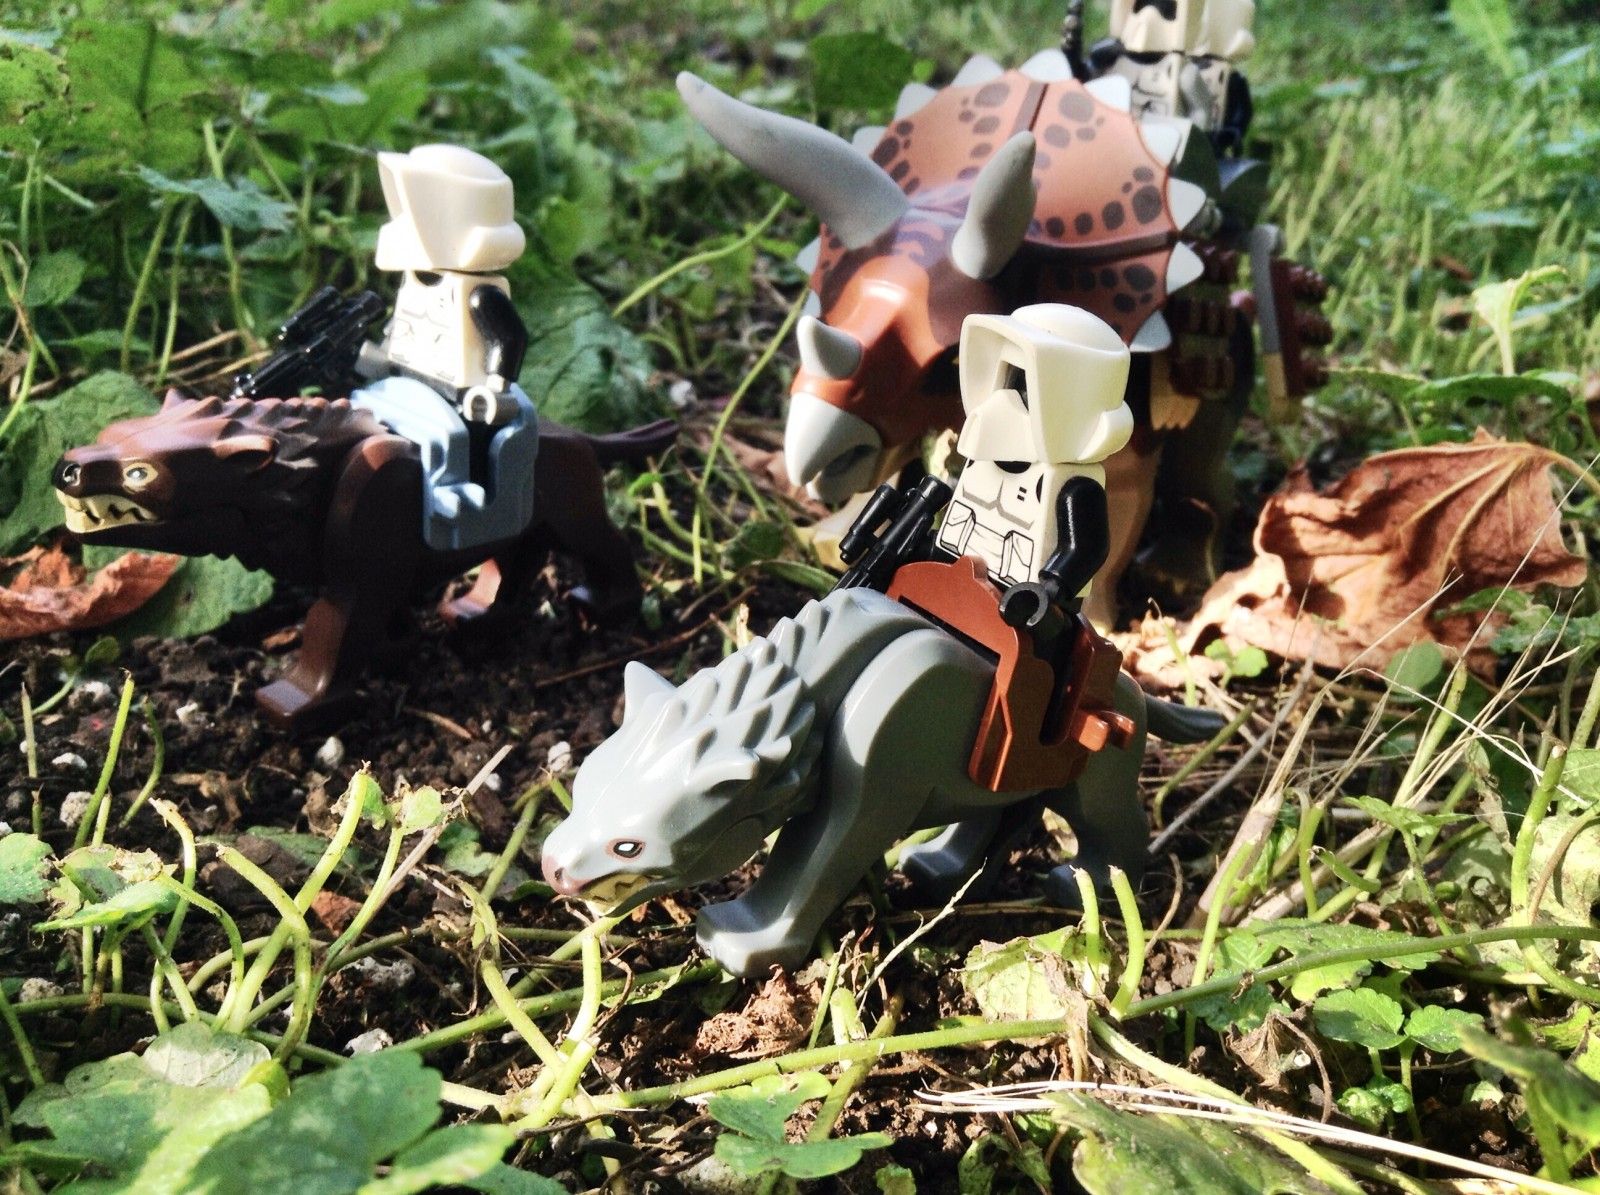 Wallpaper, starwars, LEGO, stormtroopers, dinosaurs, warg, scouttroopers, legography 2592x1936